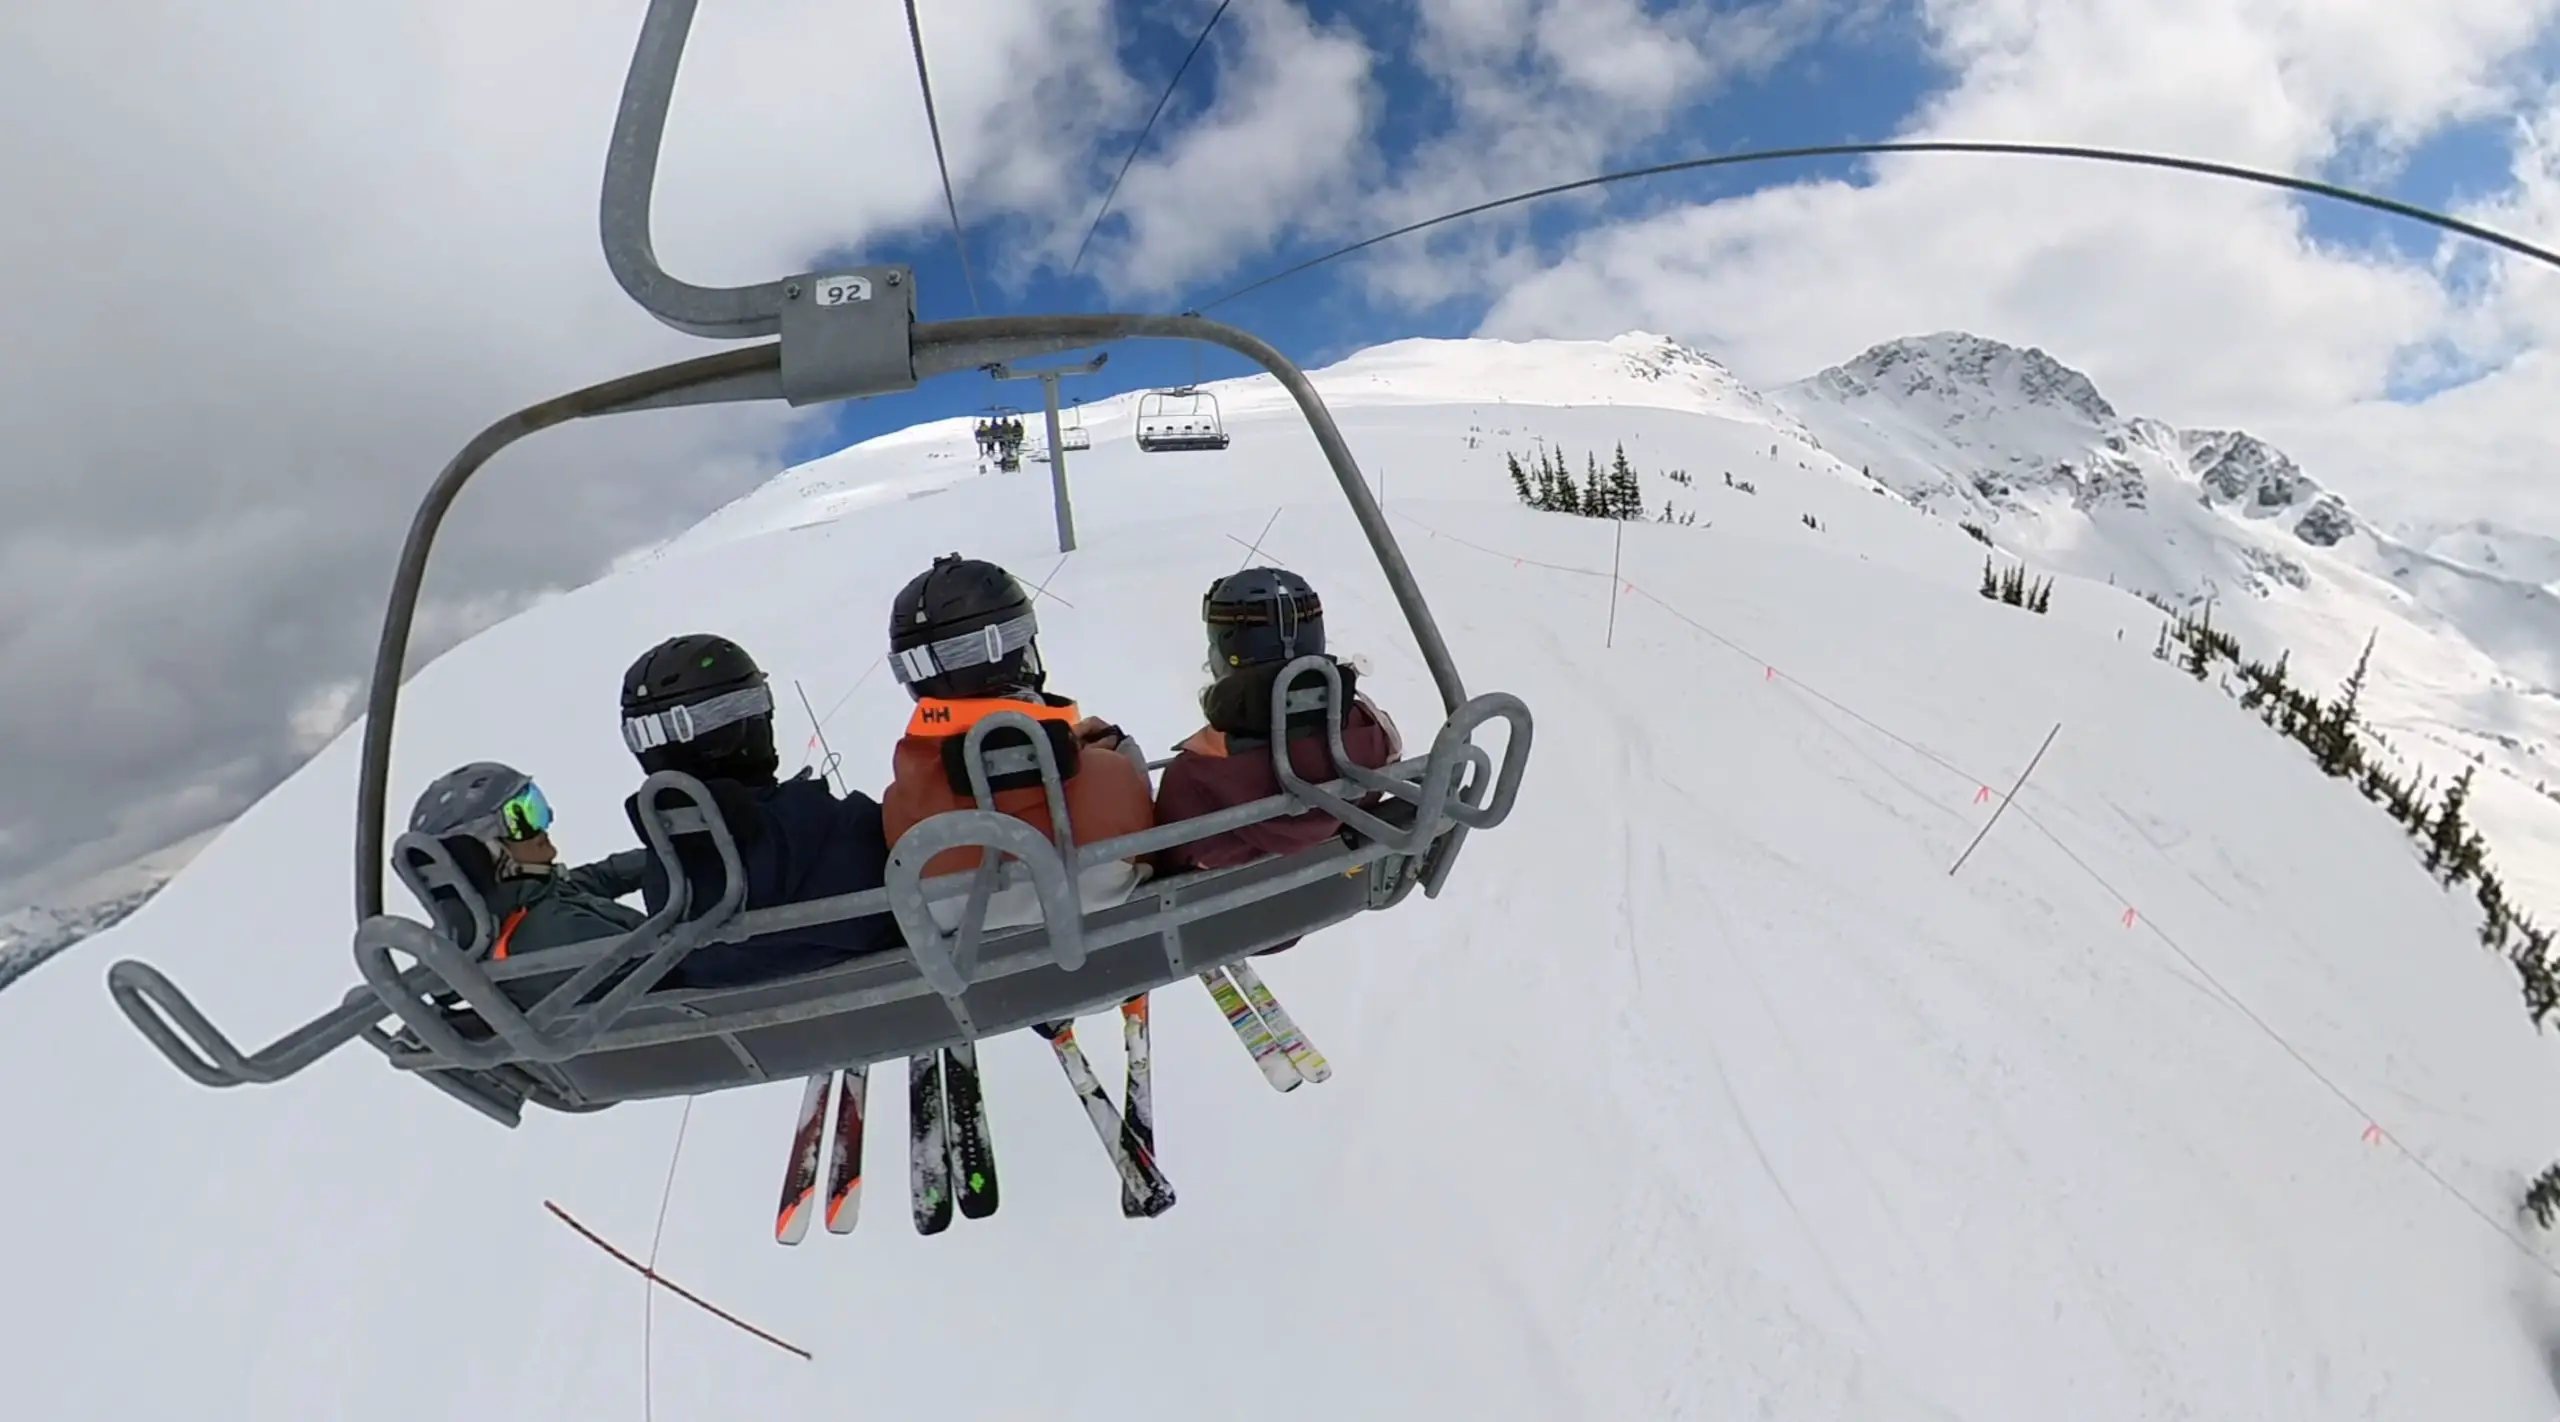 7th heaven chairlift Blackcomb mountain Whistler BC 